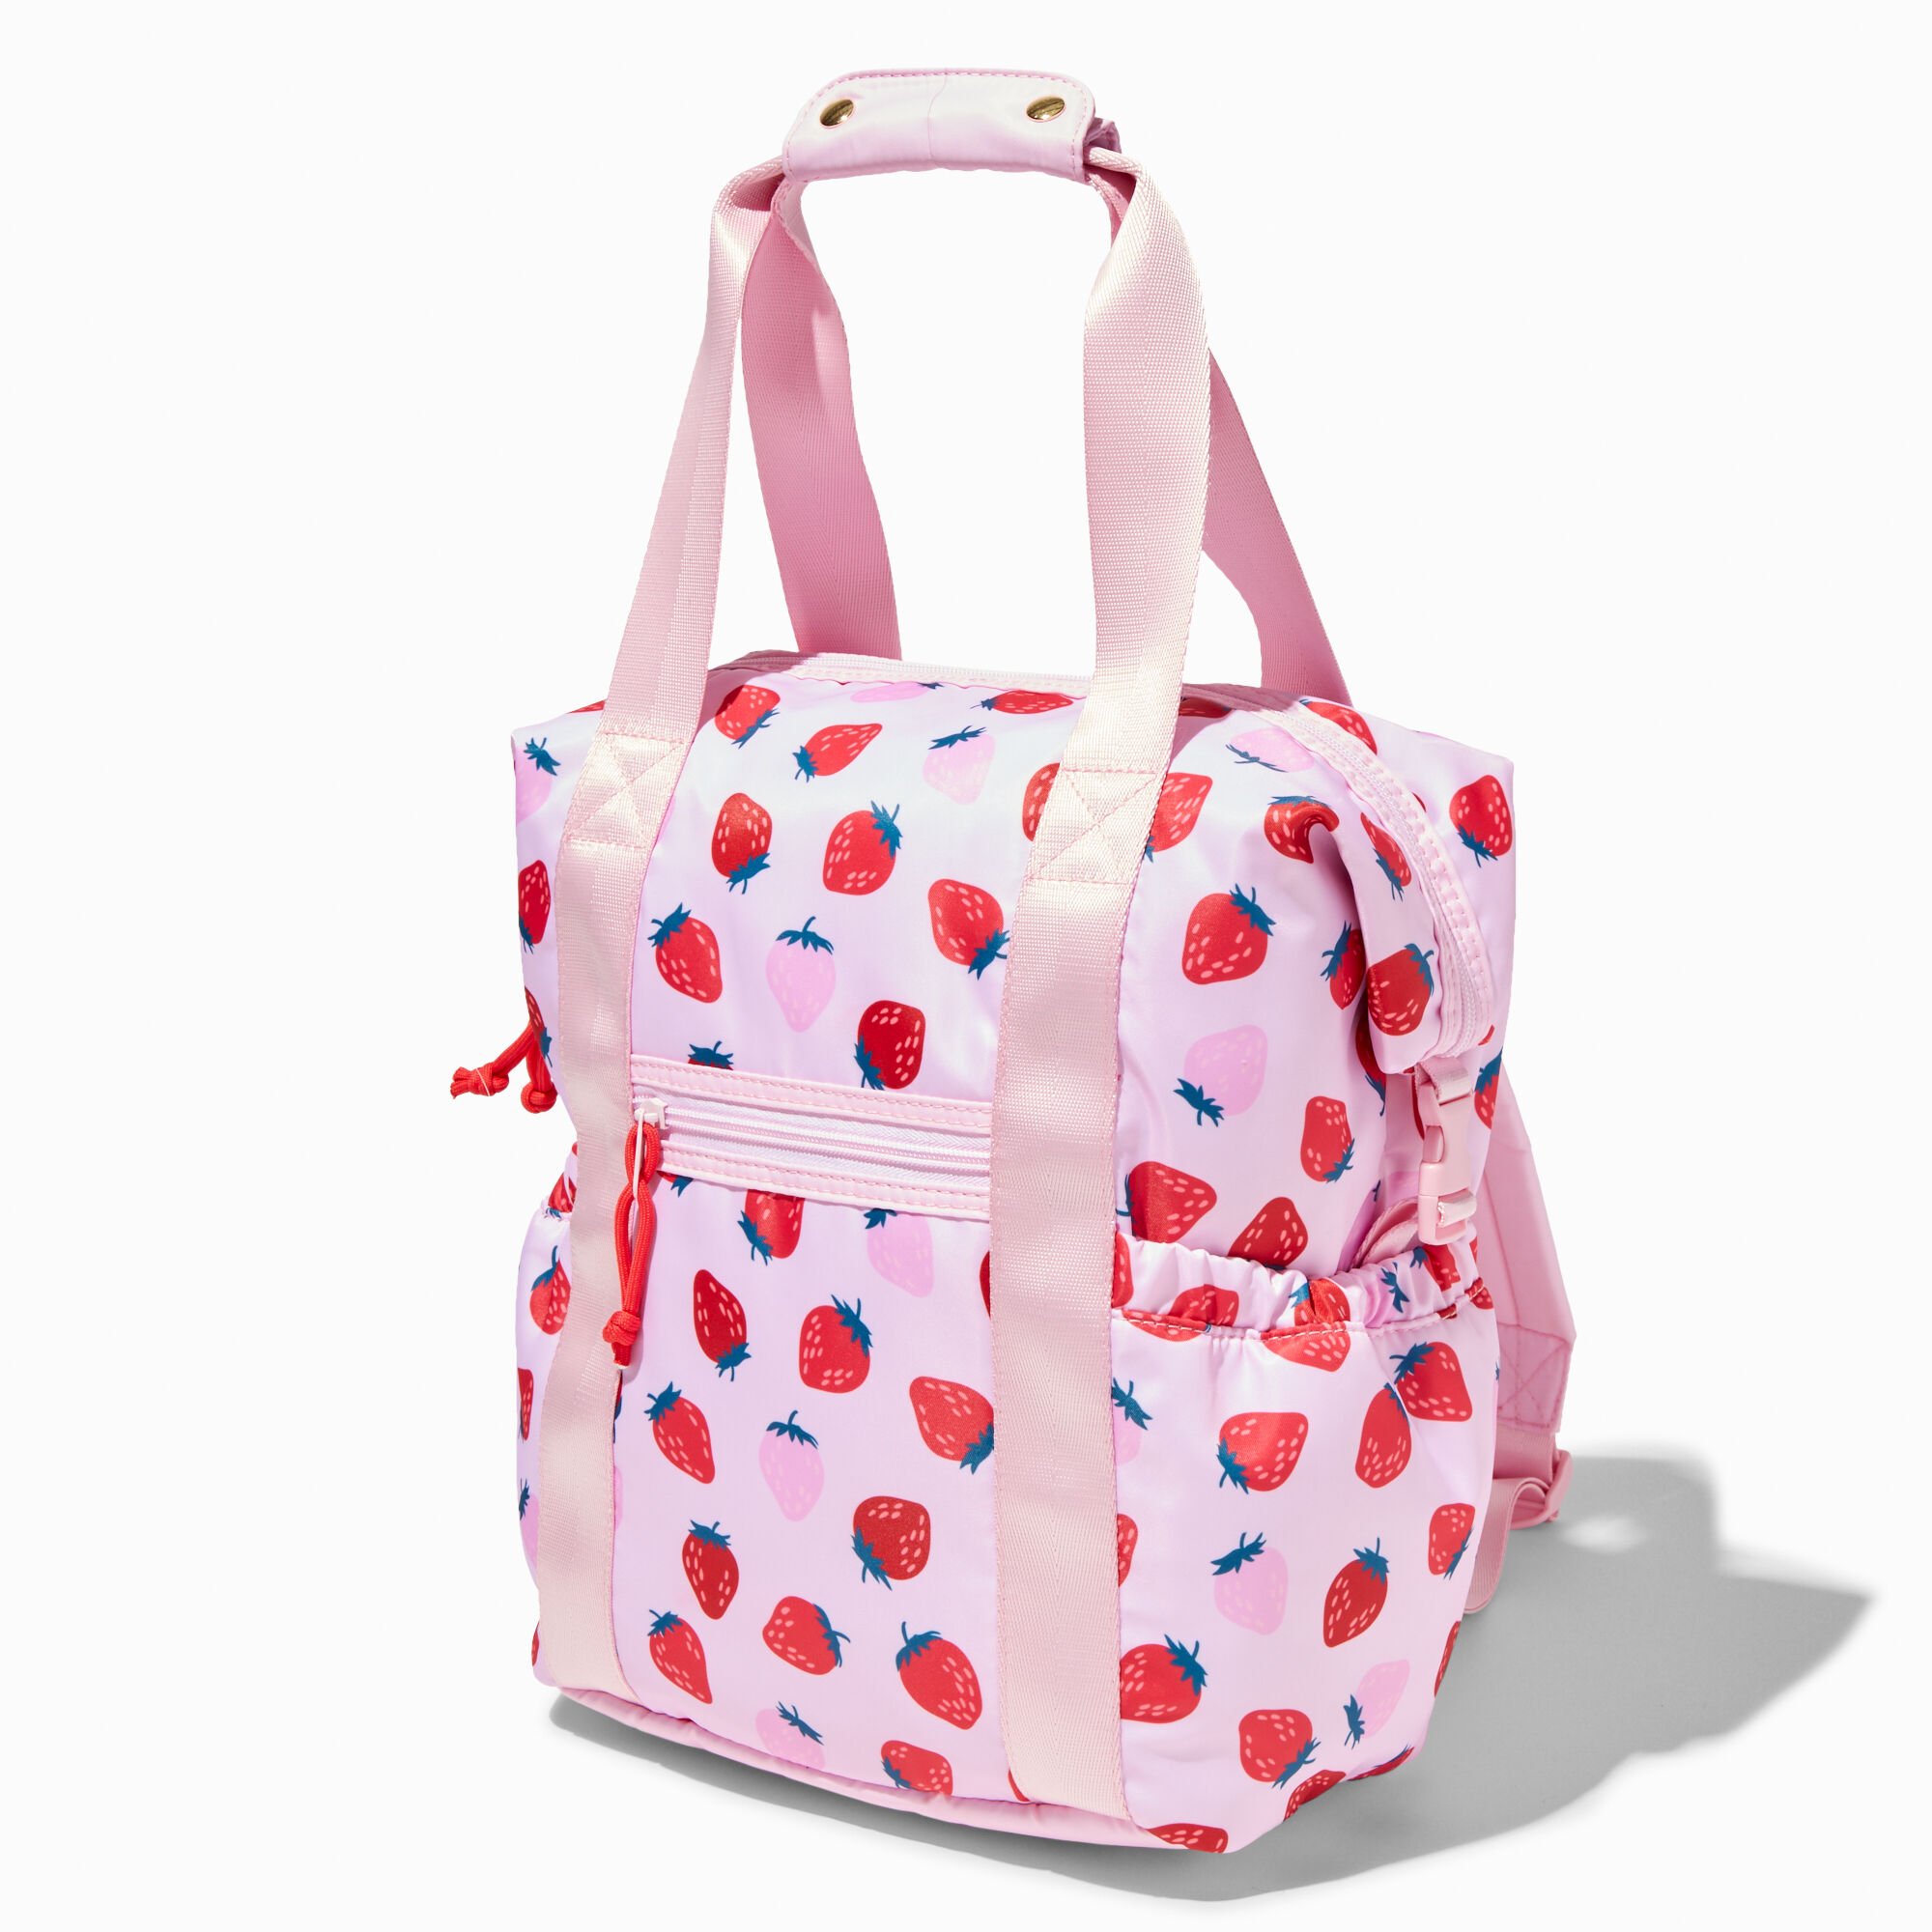 View Claires Strawberry Print Nylon Tote Style Backpack information